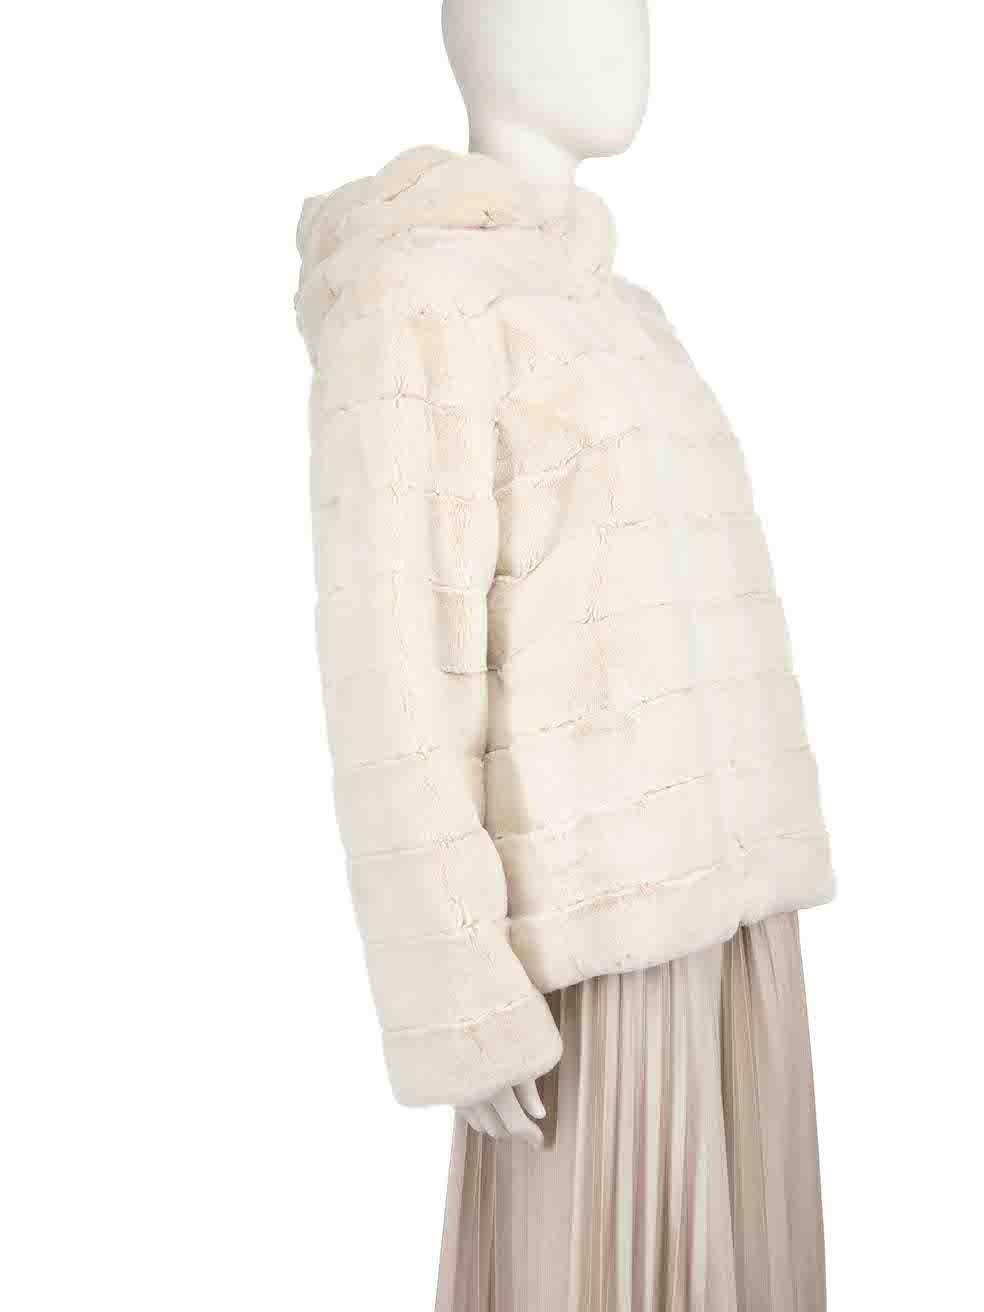 CONDITION is Very good. Minimal wear to coat is evident. There is a small pluck to the weave of the lining on this used Albinea designer resale item.
 
 Details
 Ecru
 Faux Fur
 Coat
 Hooded
 Zip and snap button fastening
 2x Side pockets
 
 
 Made